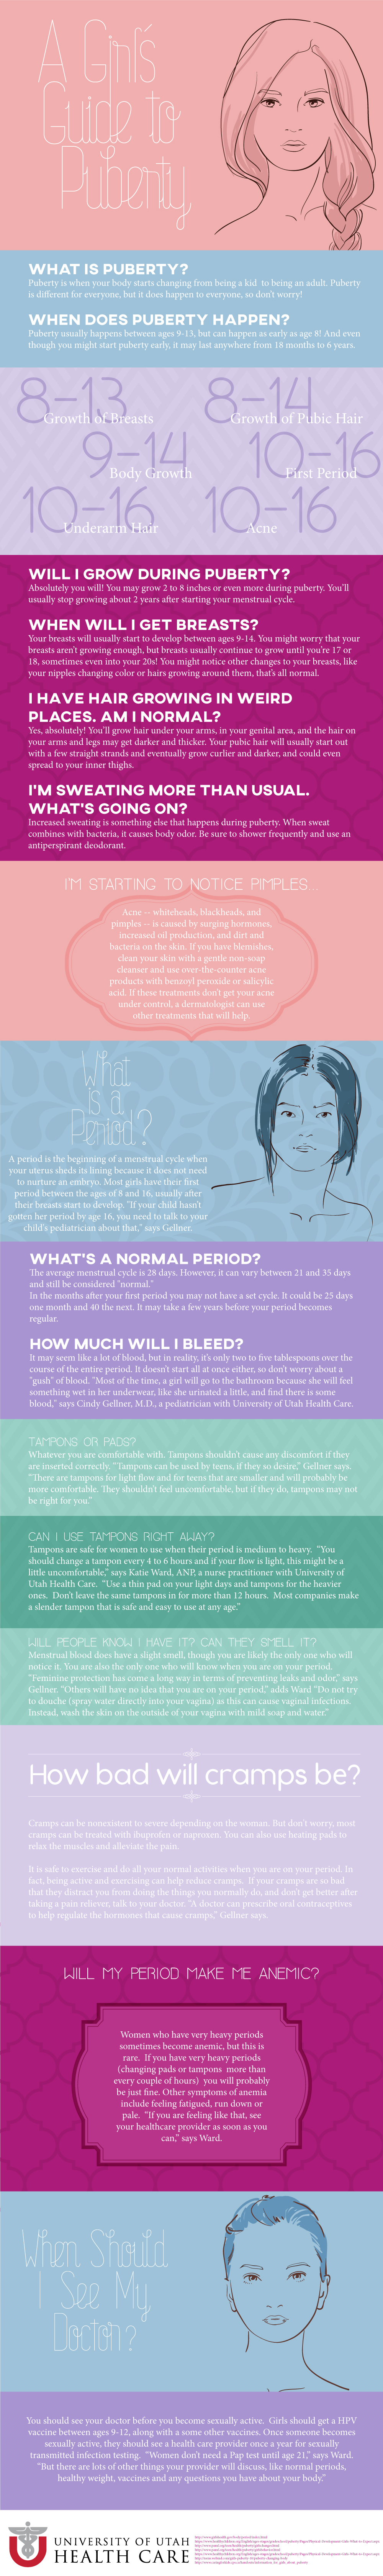 Infographic about puberty in girls